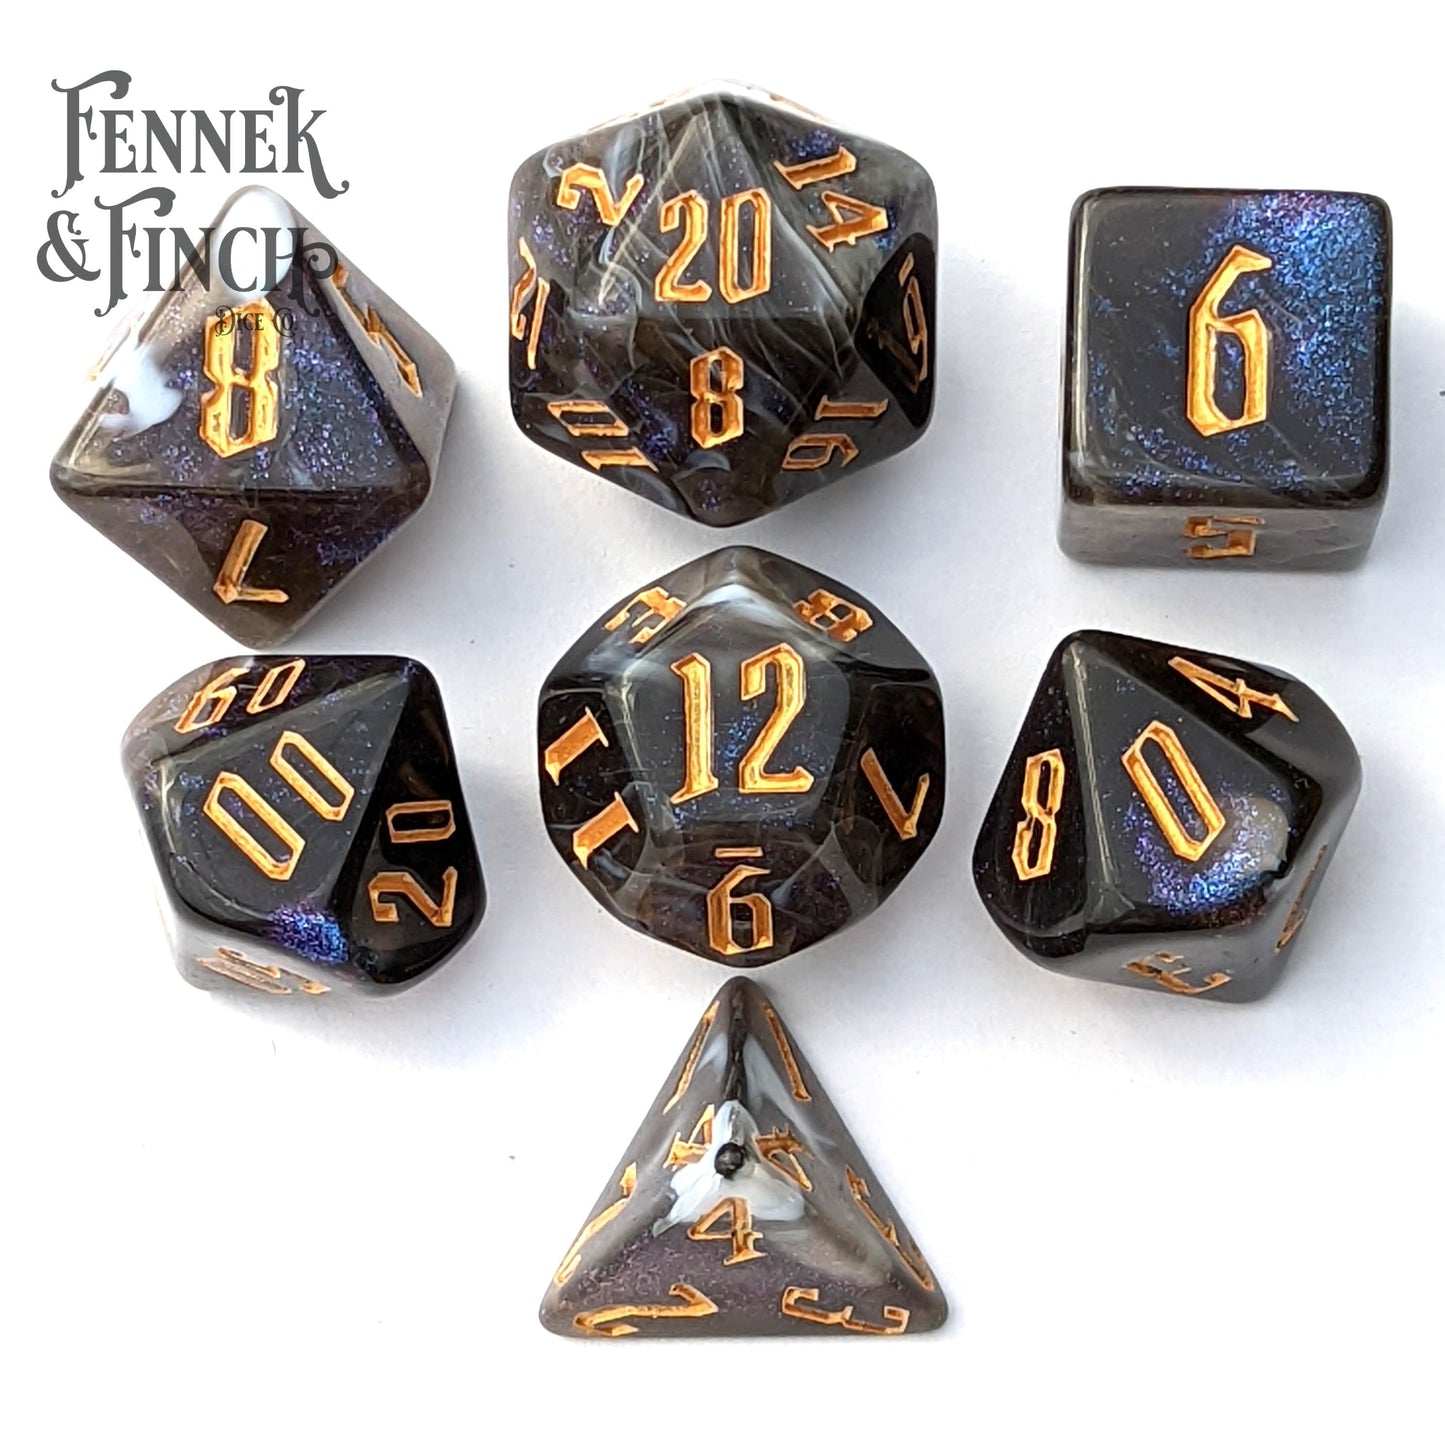 Haunt Dice Set. Marbled Black and Gray Shimmering Dice